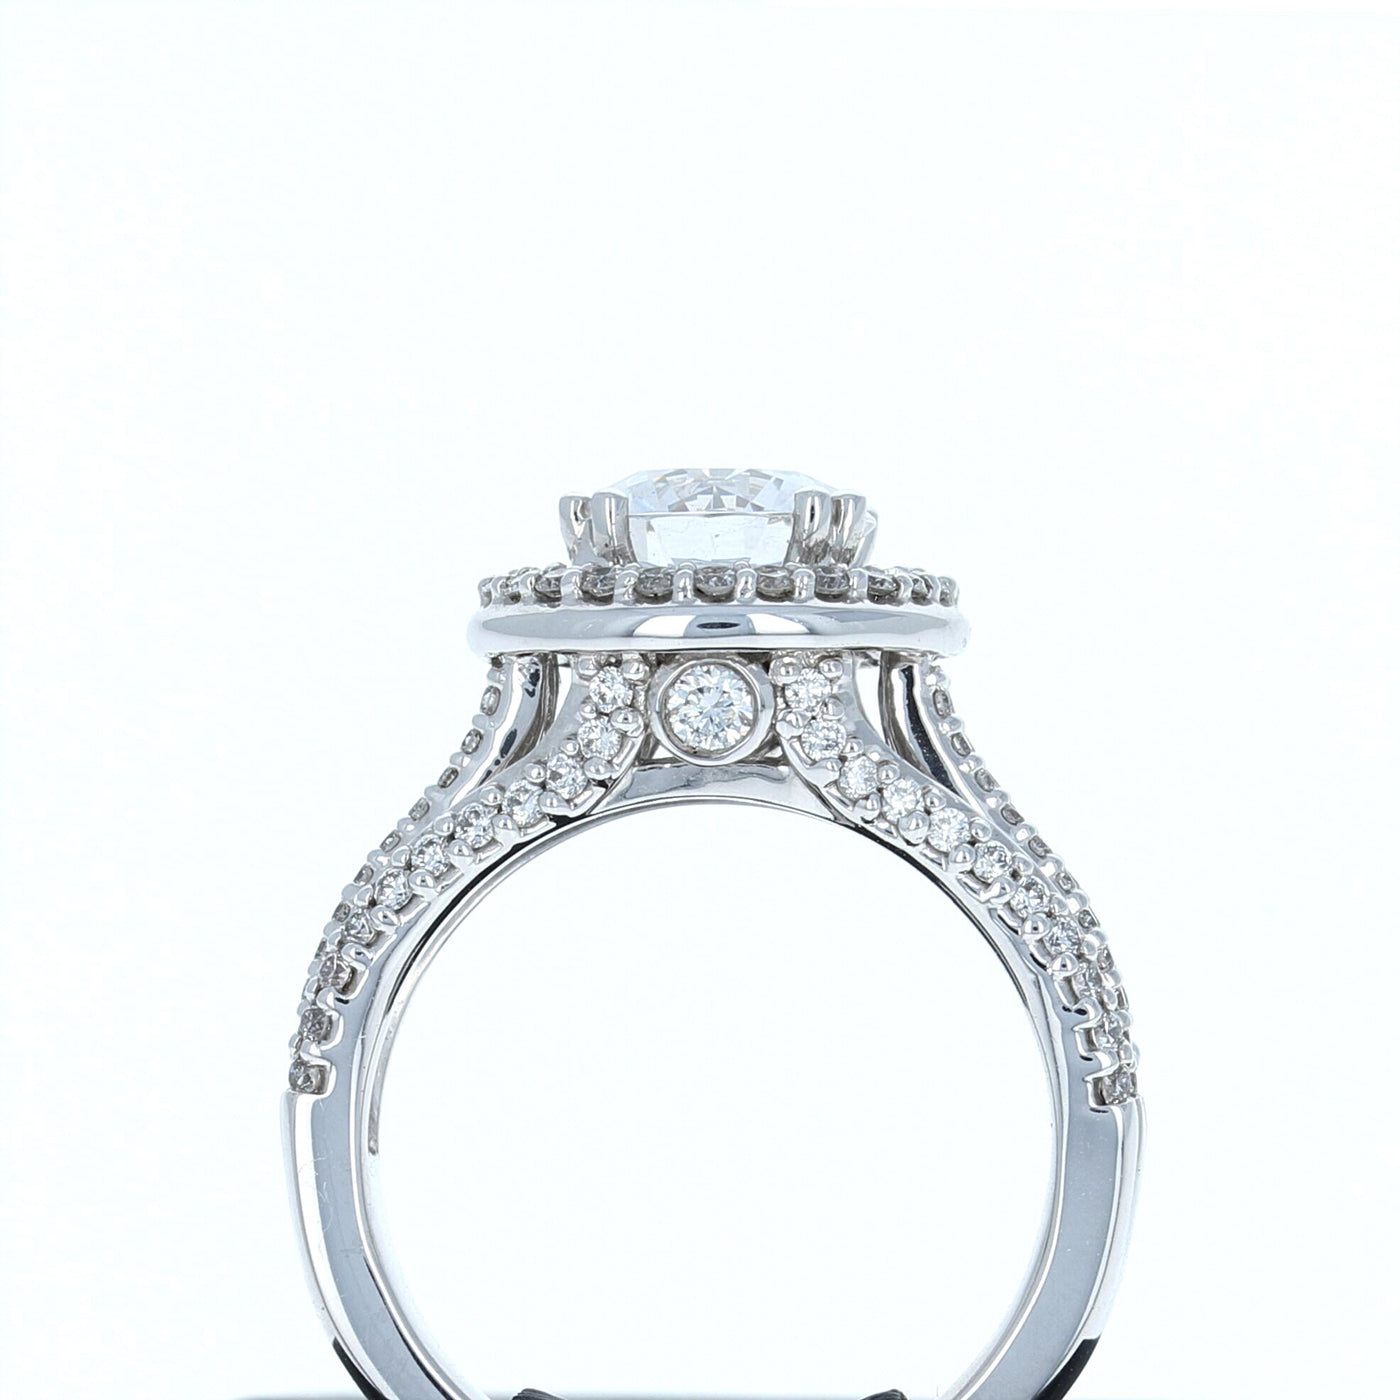 Apparel & Accessories > Jewelry > Rings A Jaffe Diamond Engagement Ring in White Gold ME1601 Pierce Custom Jewelers